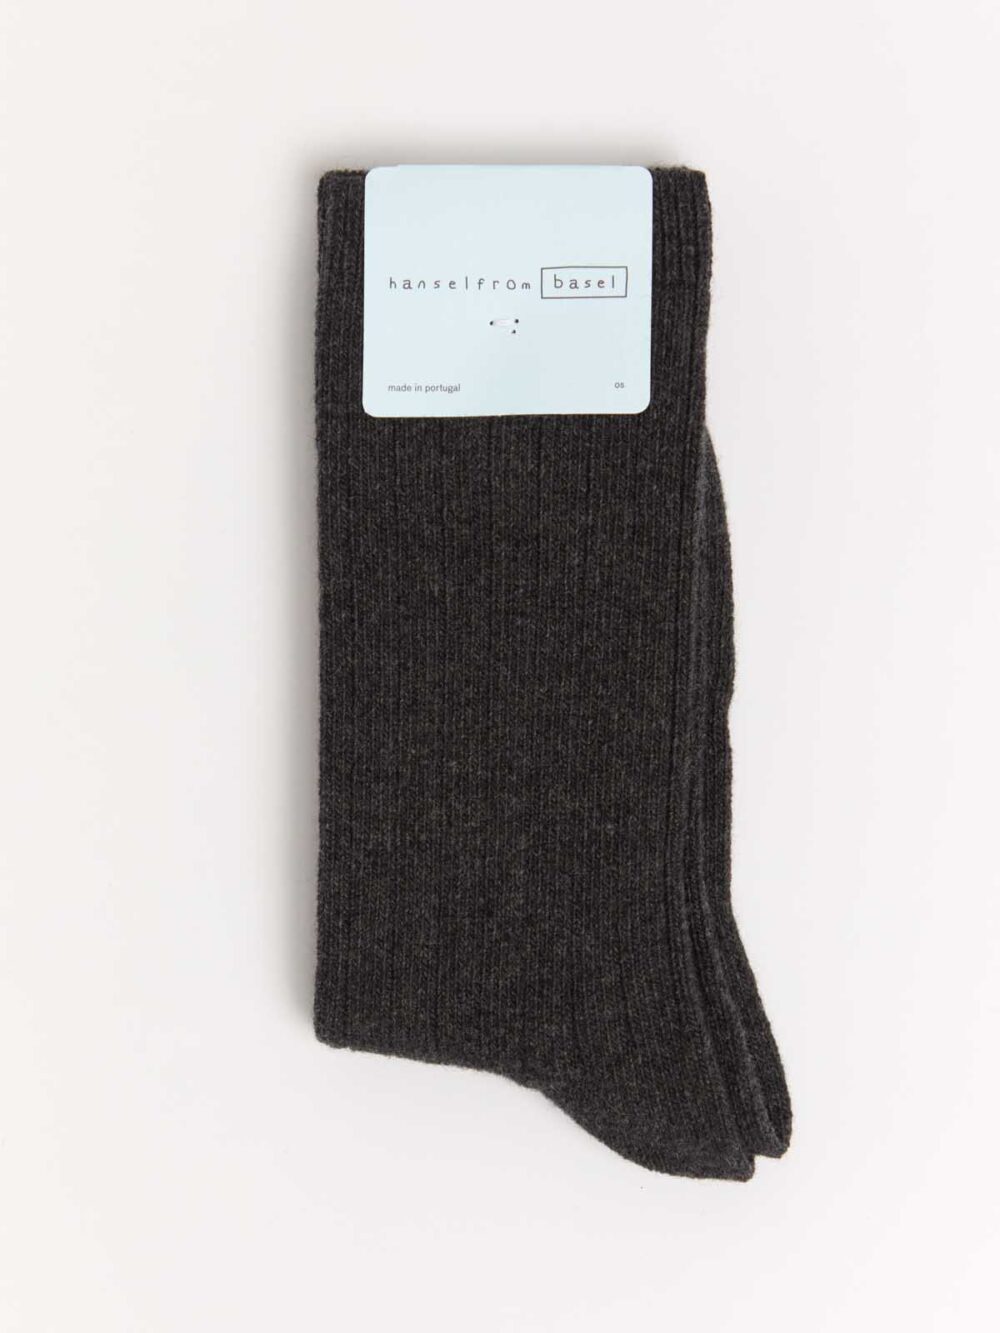 Italia Cashmere Rib Crew in Charcoal by Hansel from Basel